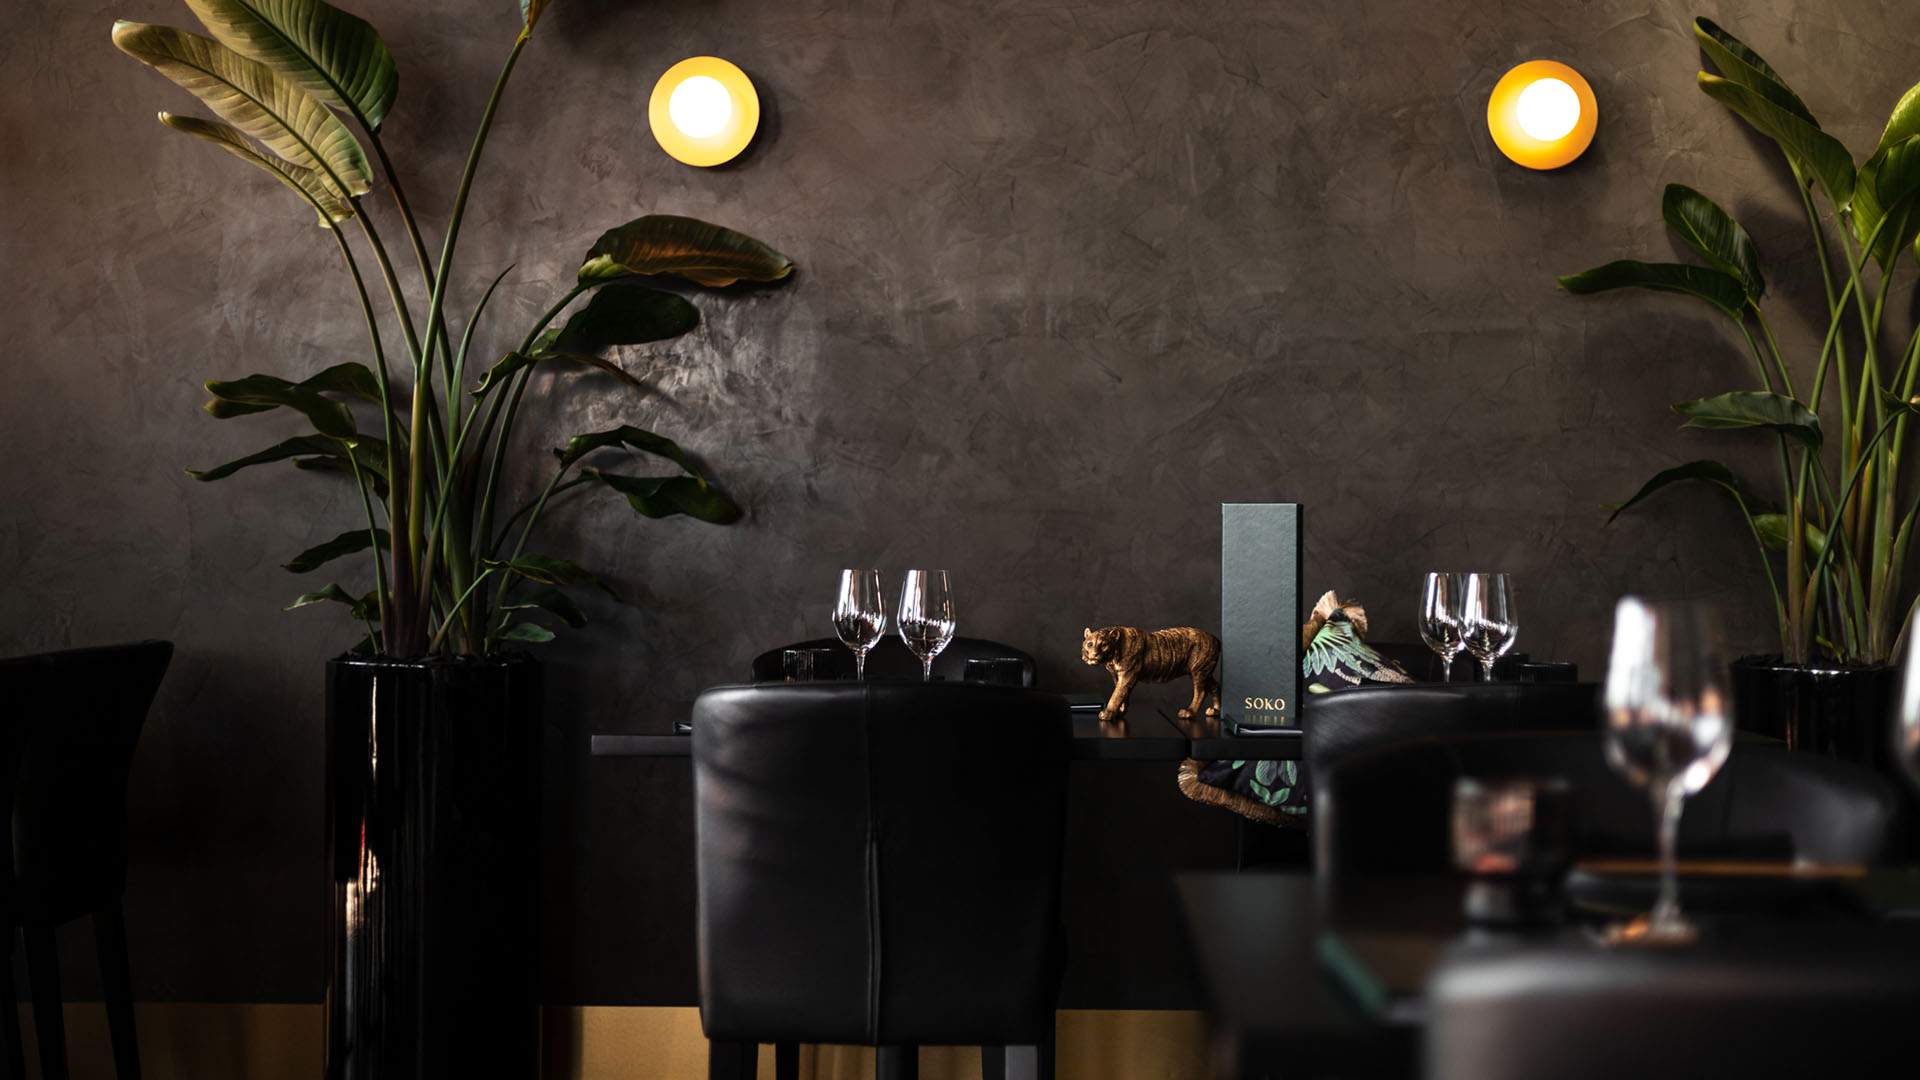 Now Open: Soko Rooftop Is Fortitude Valley's Luxe New 14th-Floor Peruvian and Japanese Restaurant and Bar